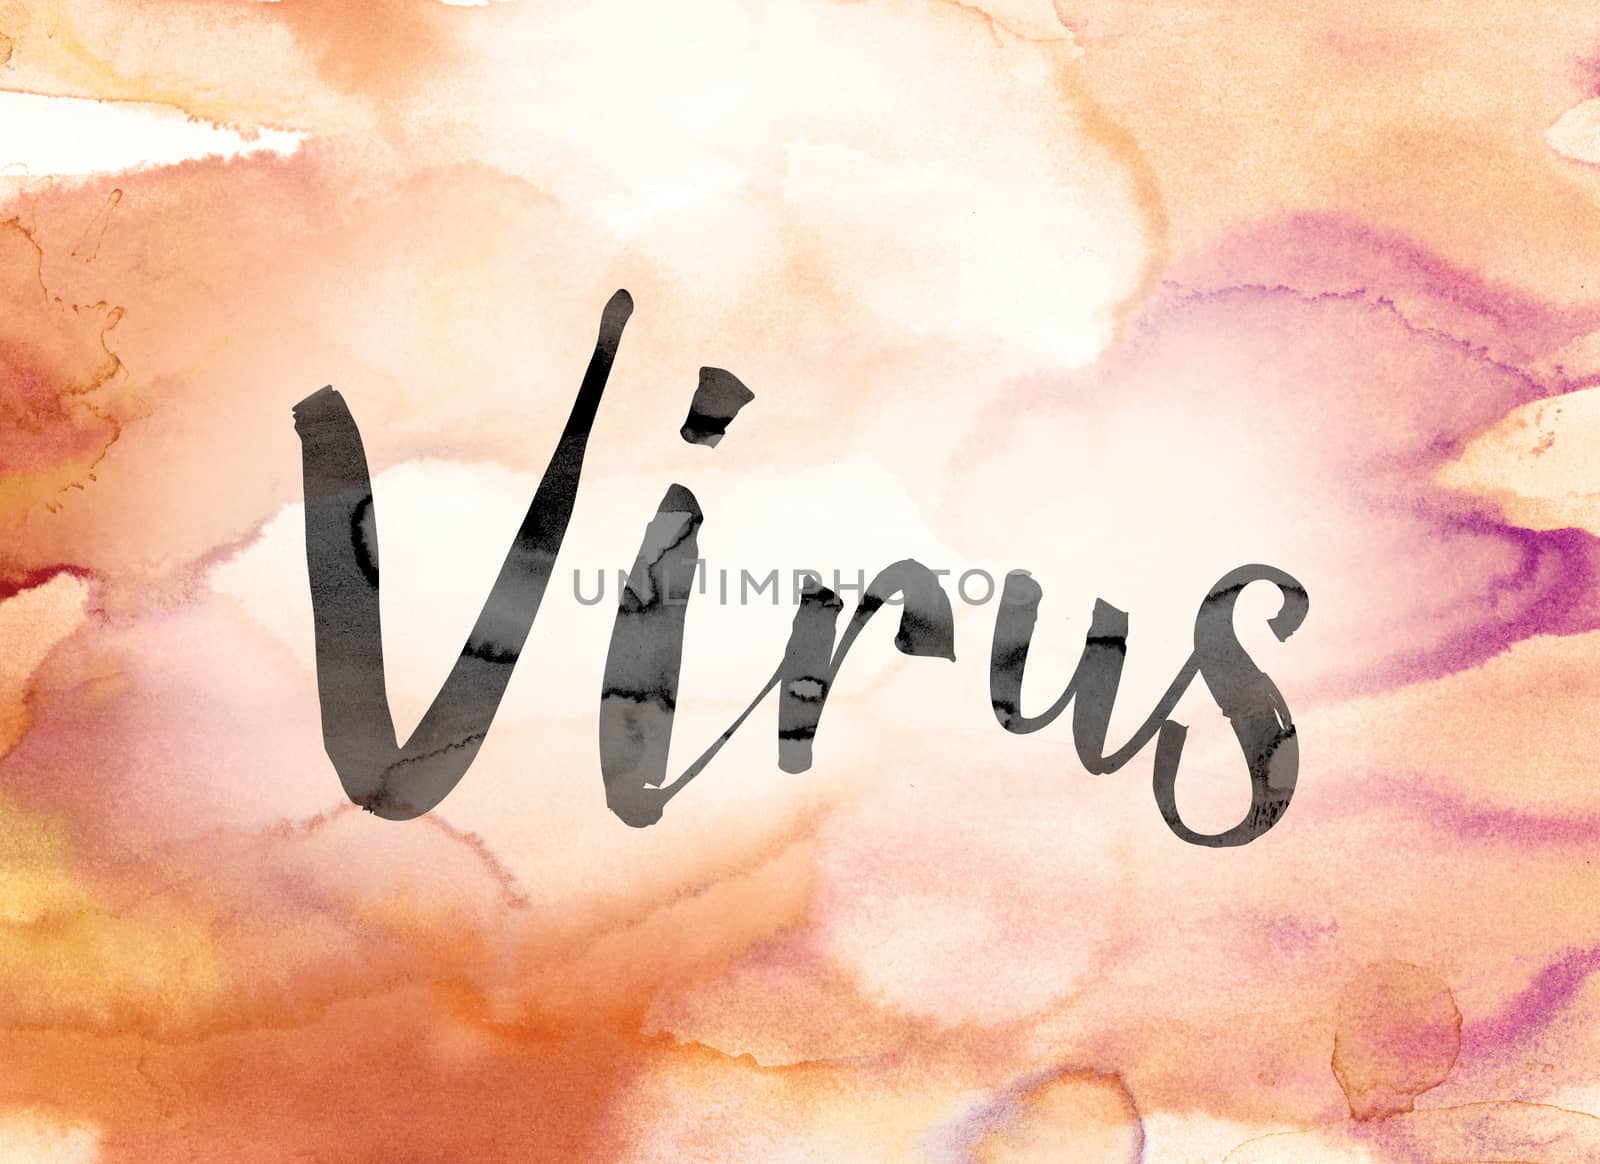 The word "Virus" painted in black ink over a colorful watercolor washed background concept and theme.